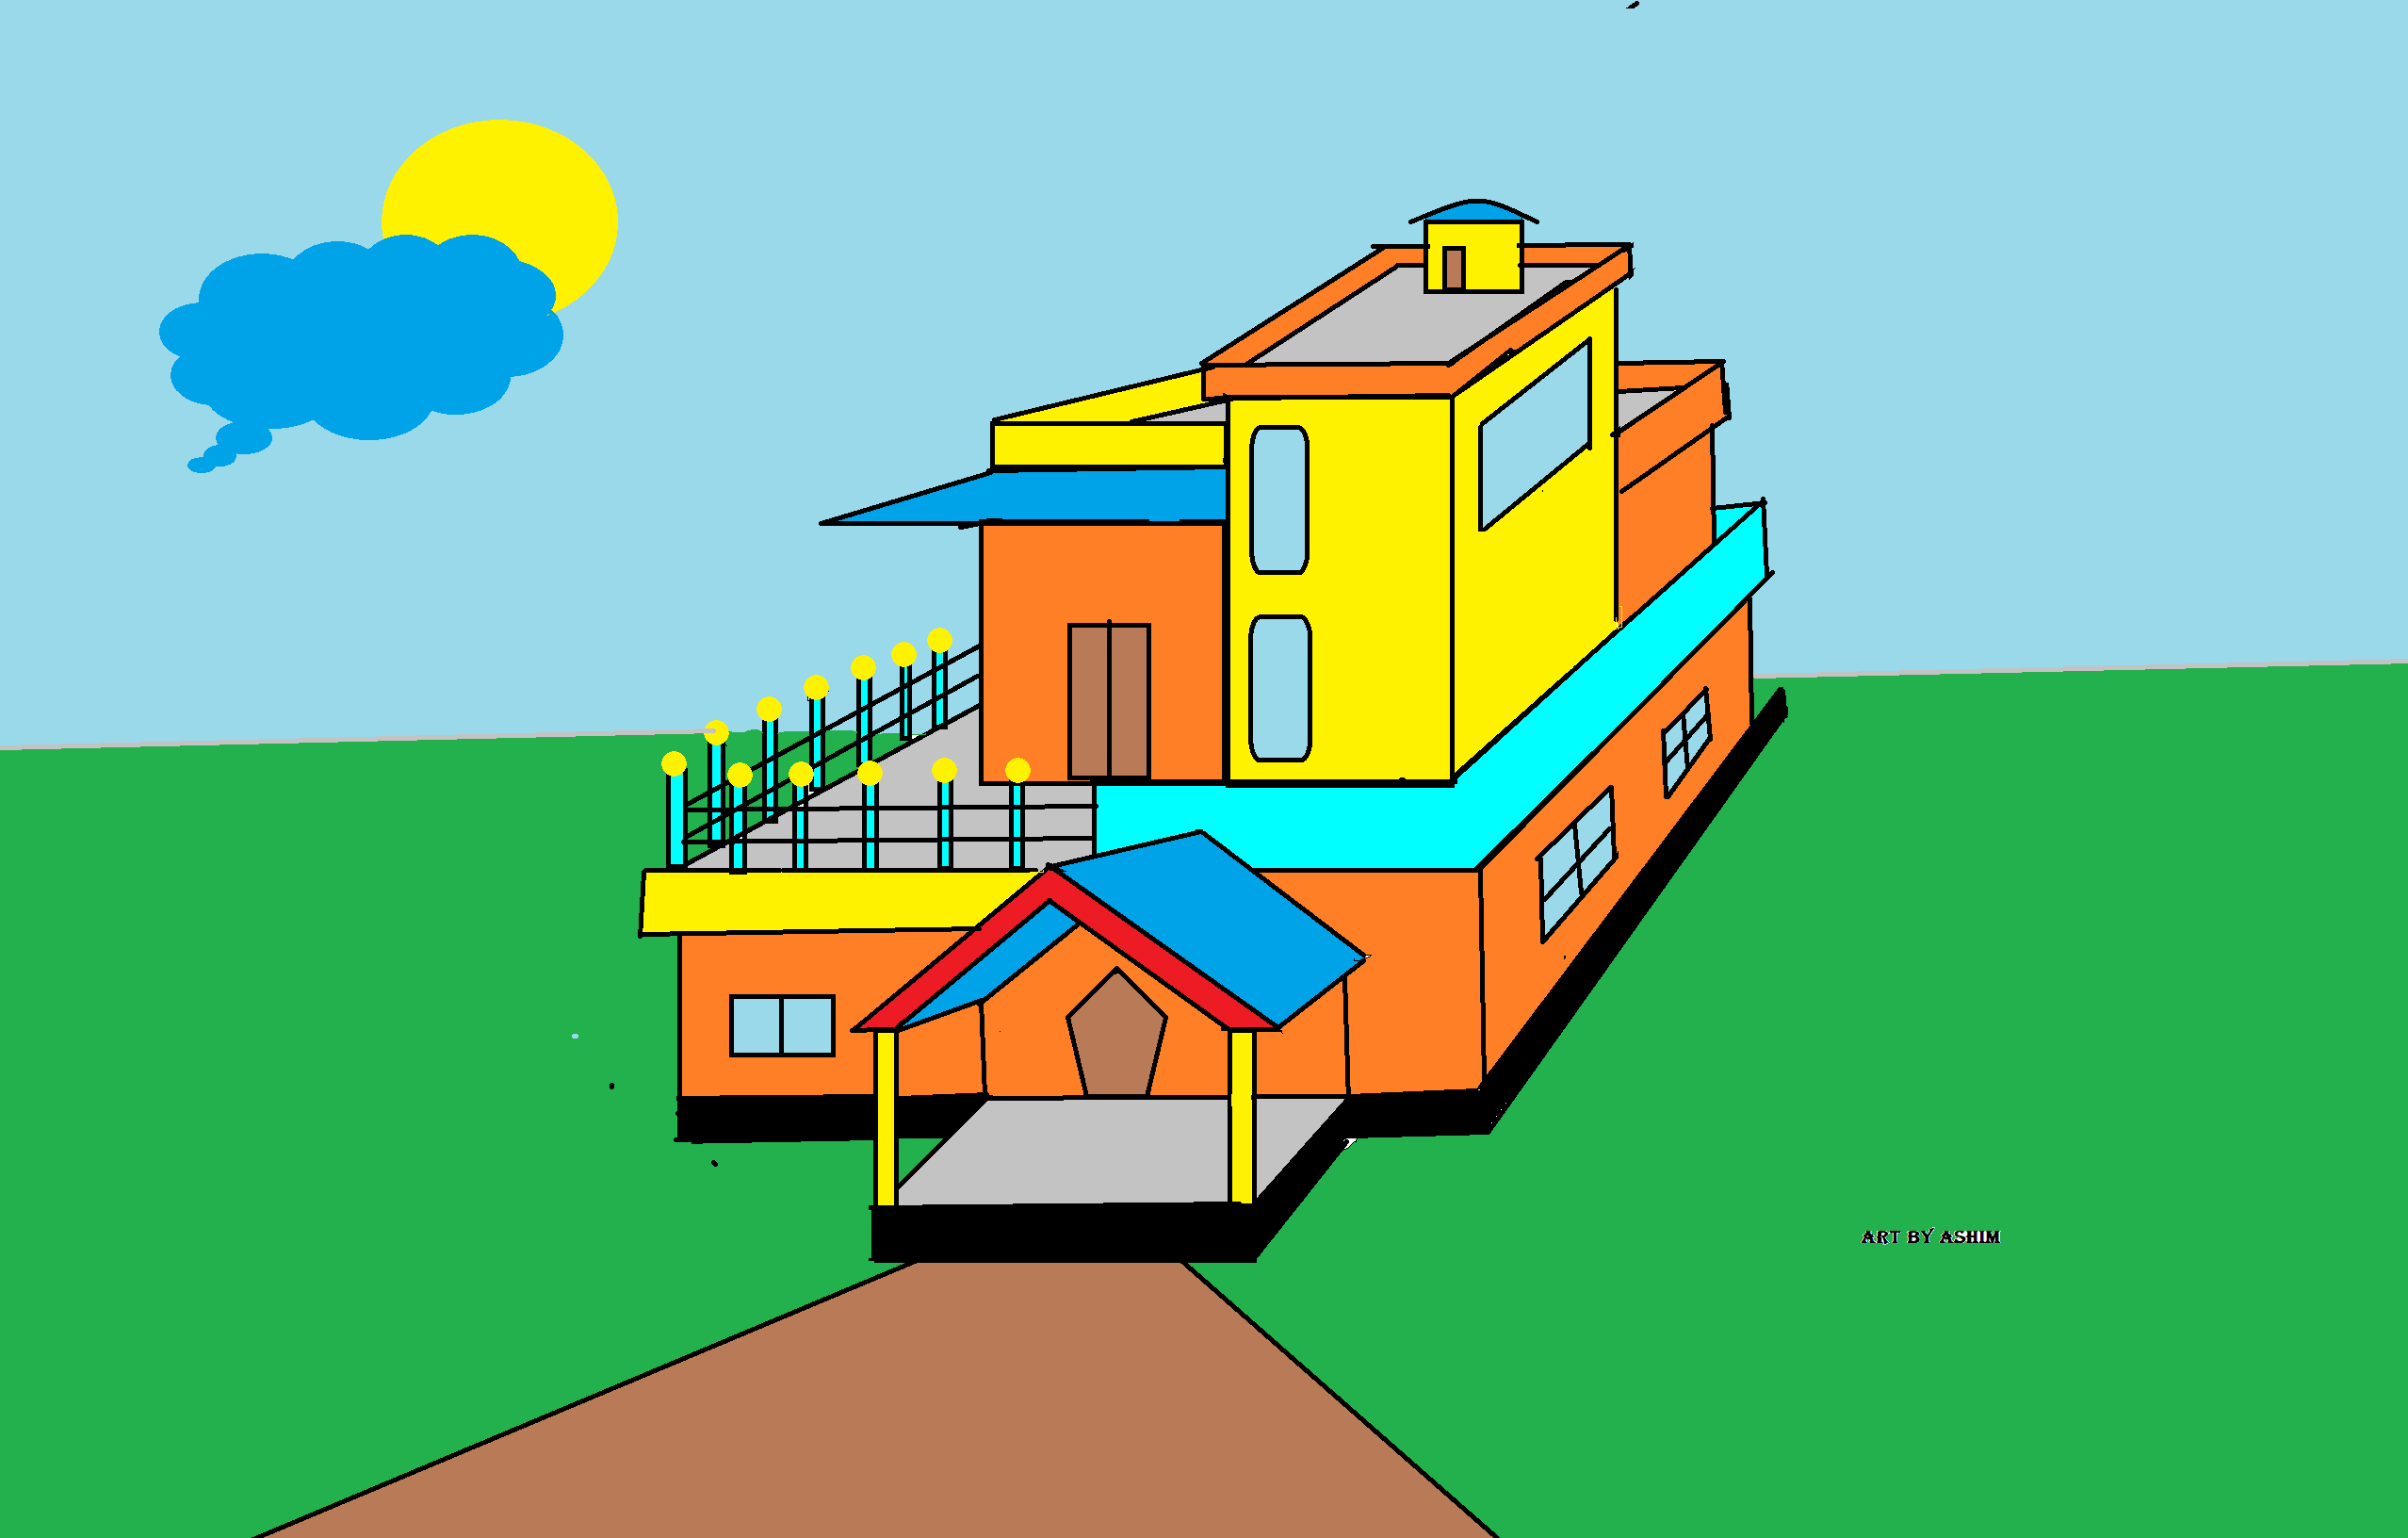 Easy How Draw a House with a Car Tutorial Video, Coloring Page